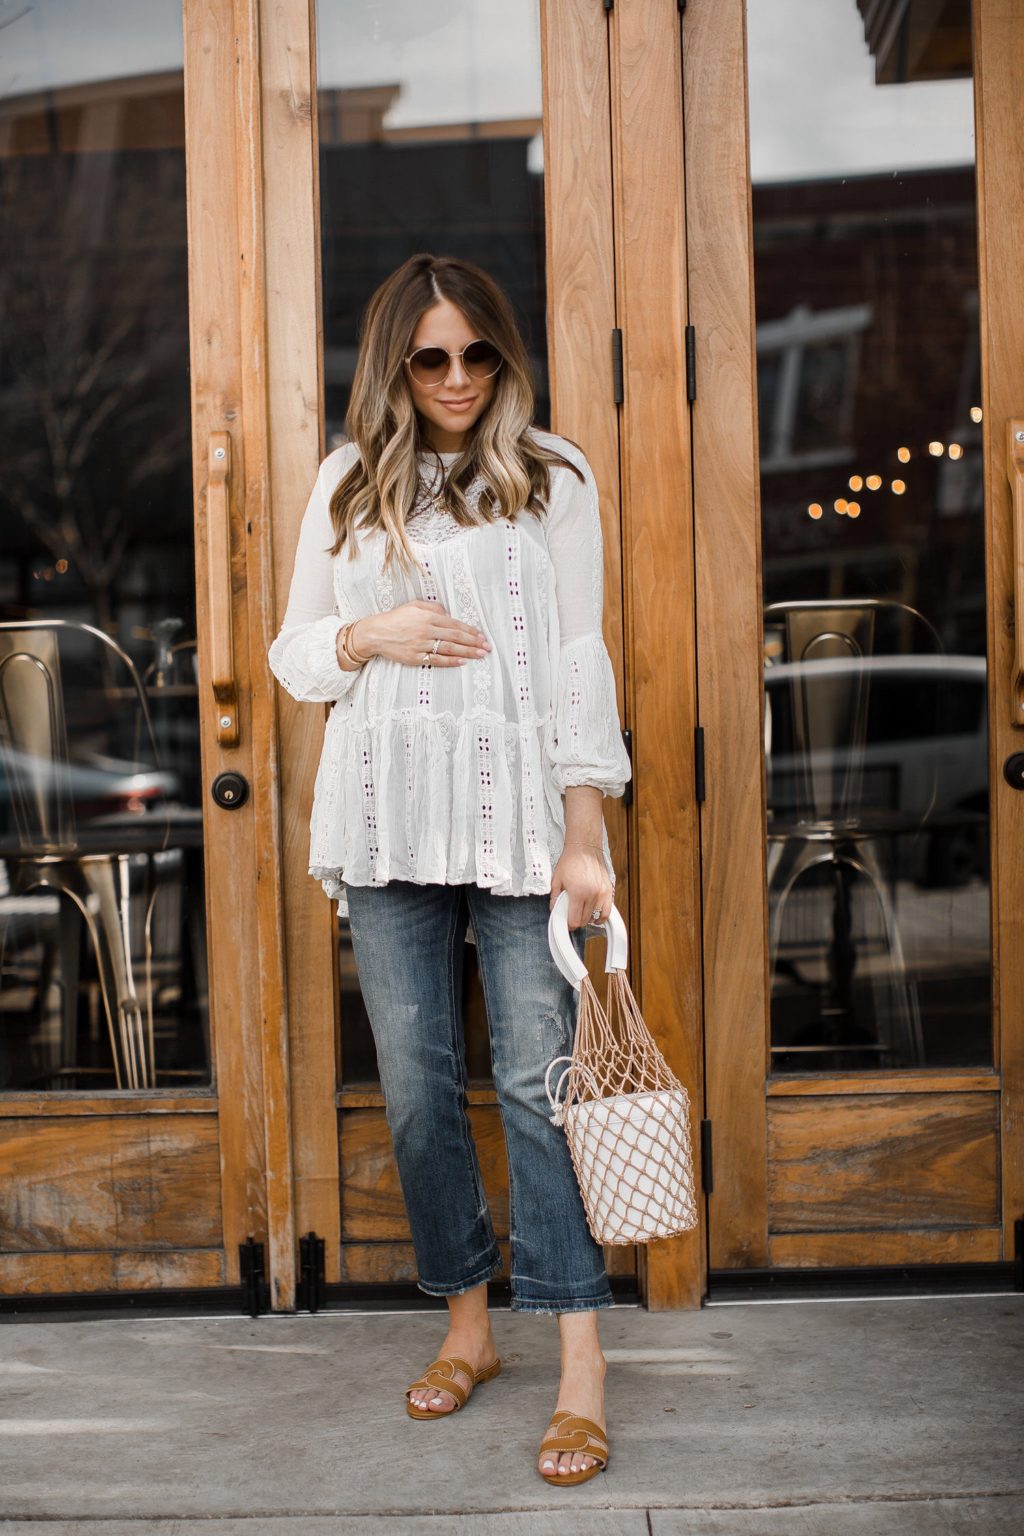 The White Lace Tunic You Can Wear Now and Later This Summer